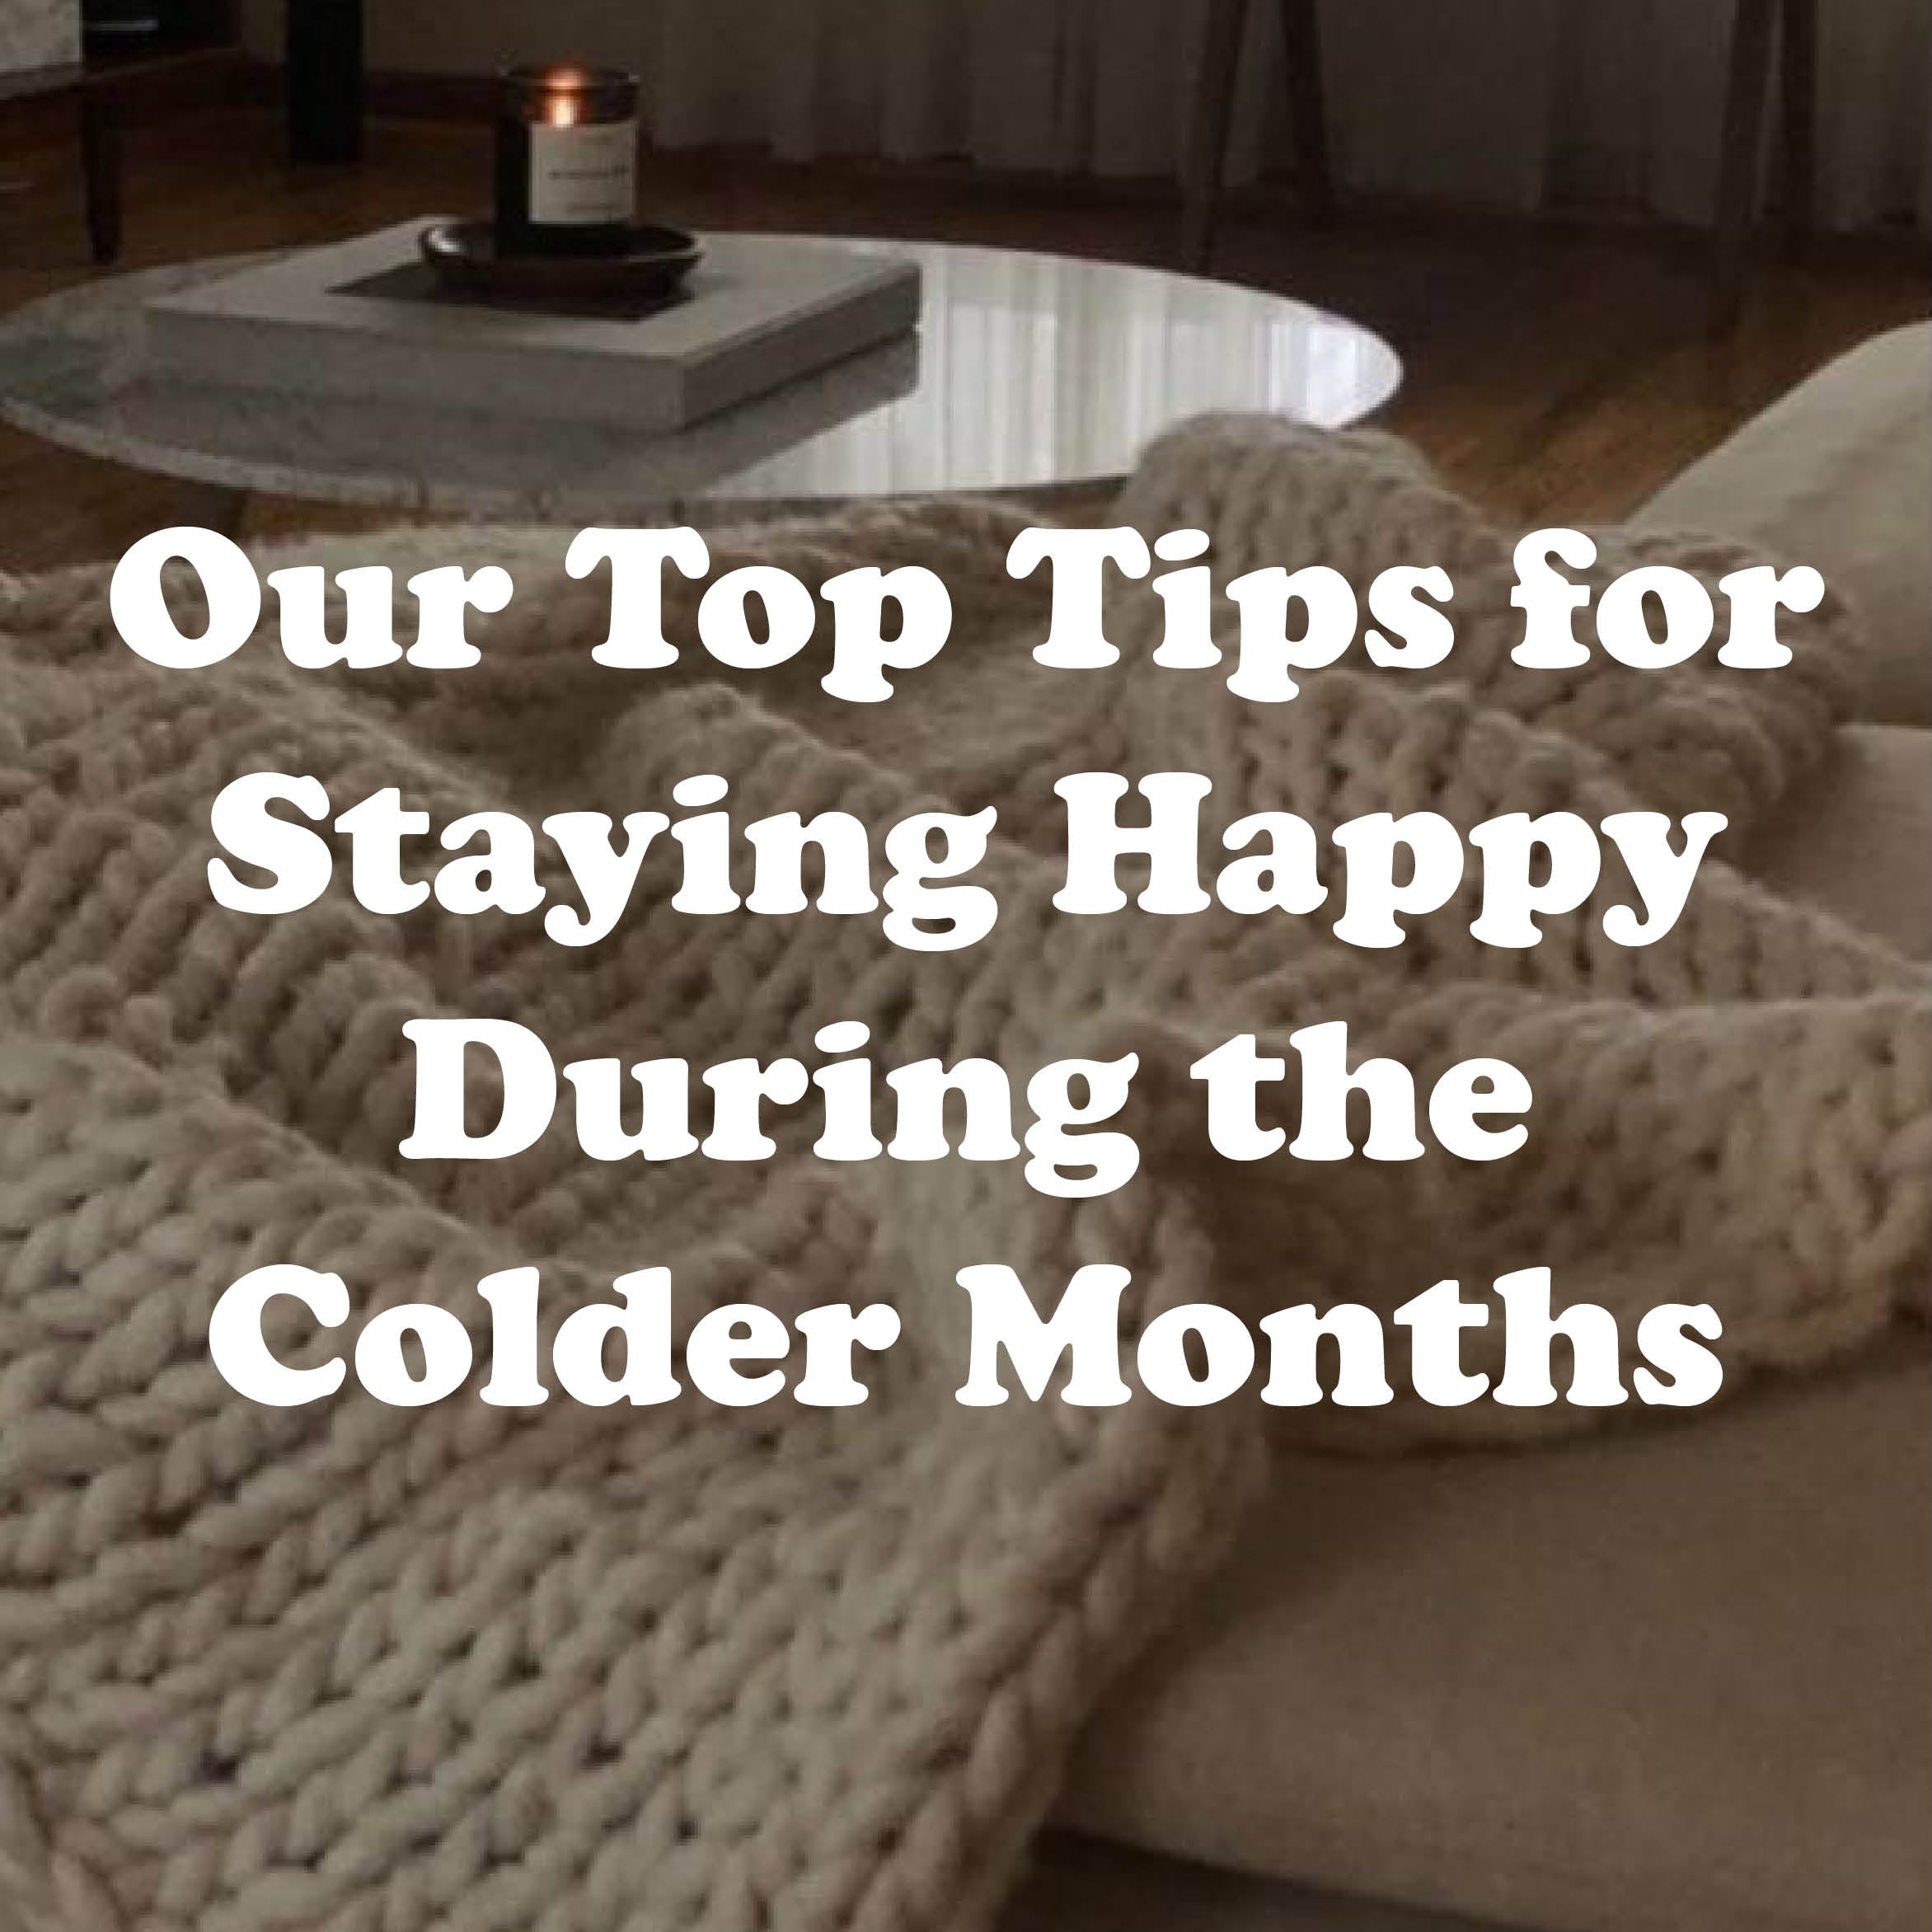 Our Top Tips for Staying Happy During the Colder Months